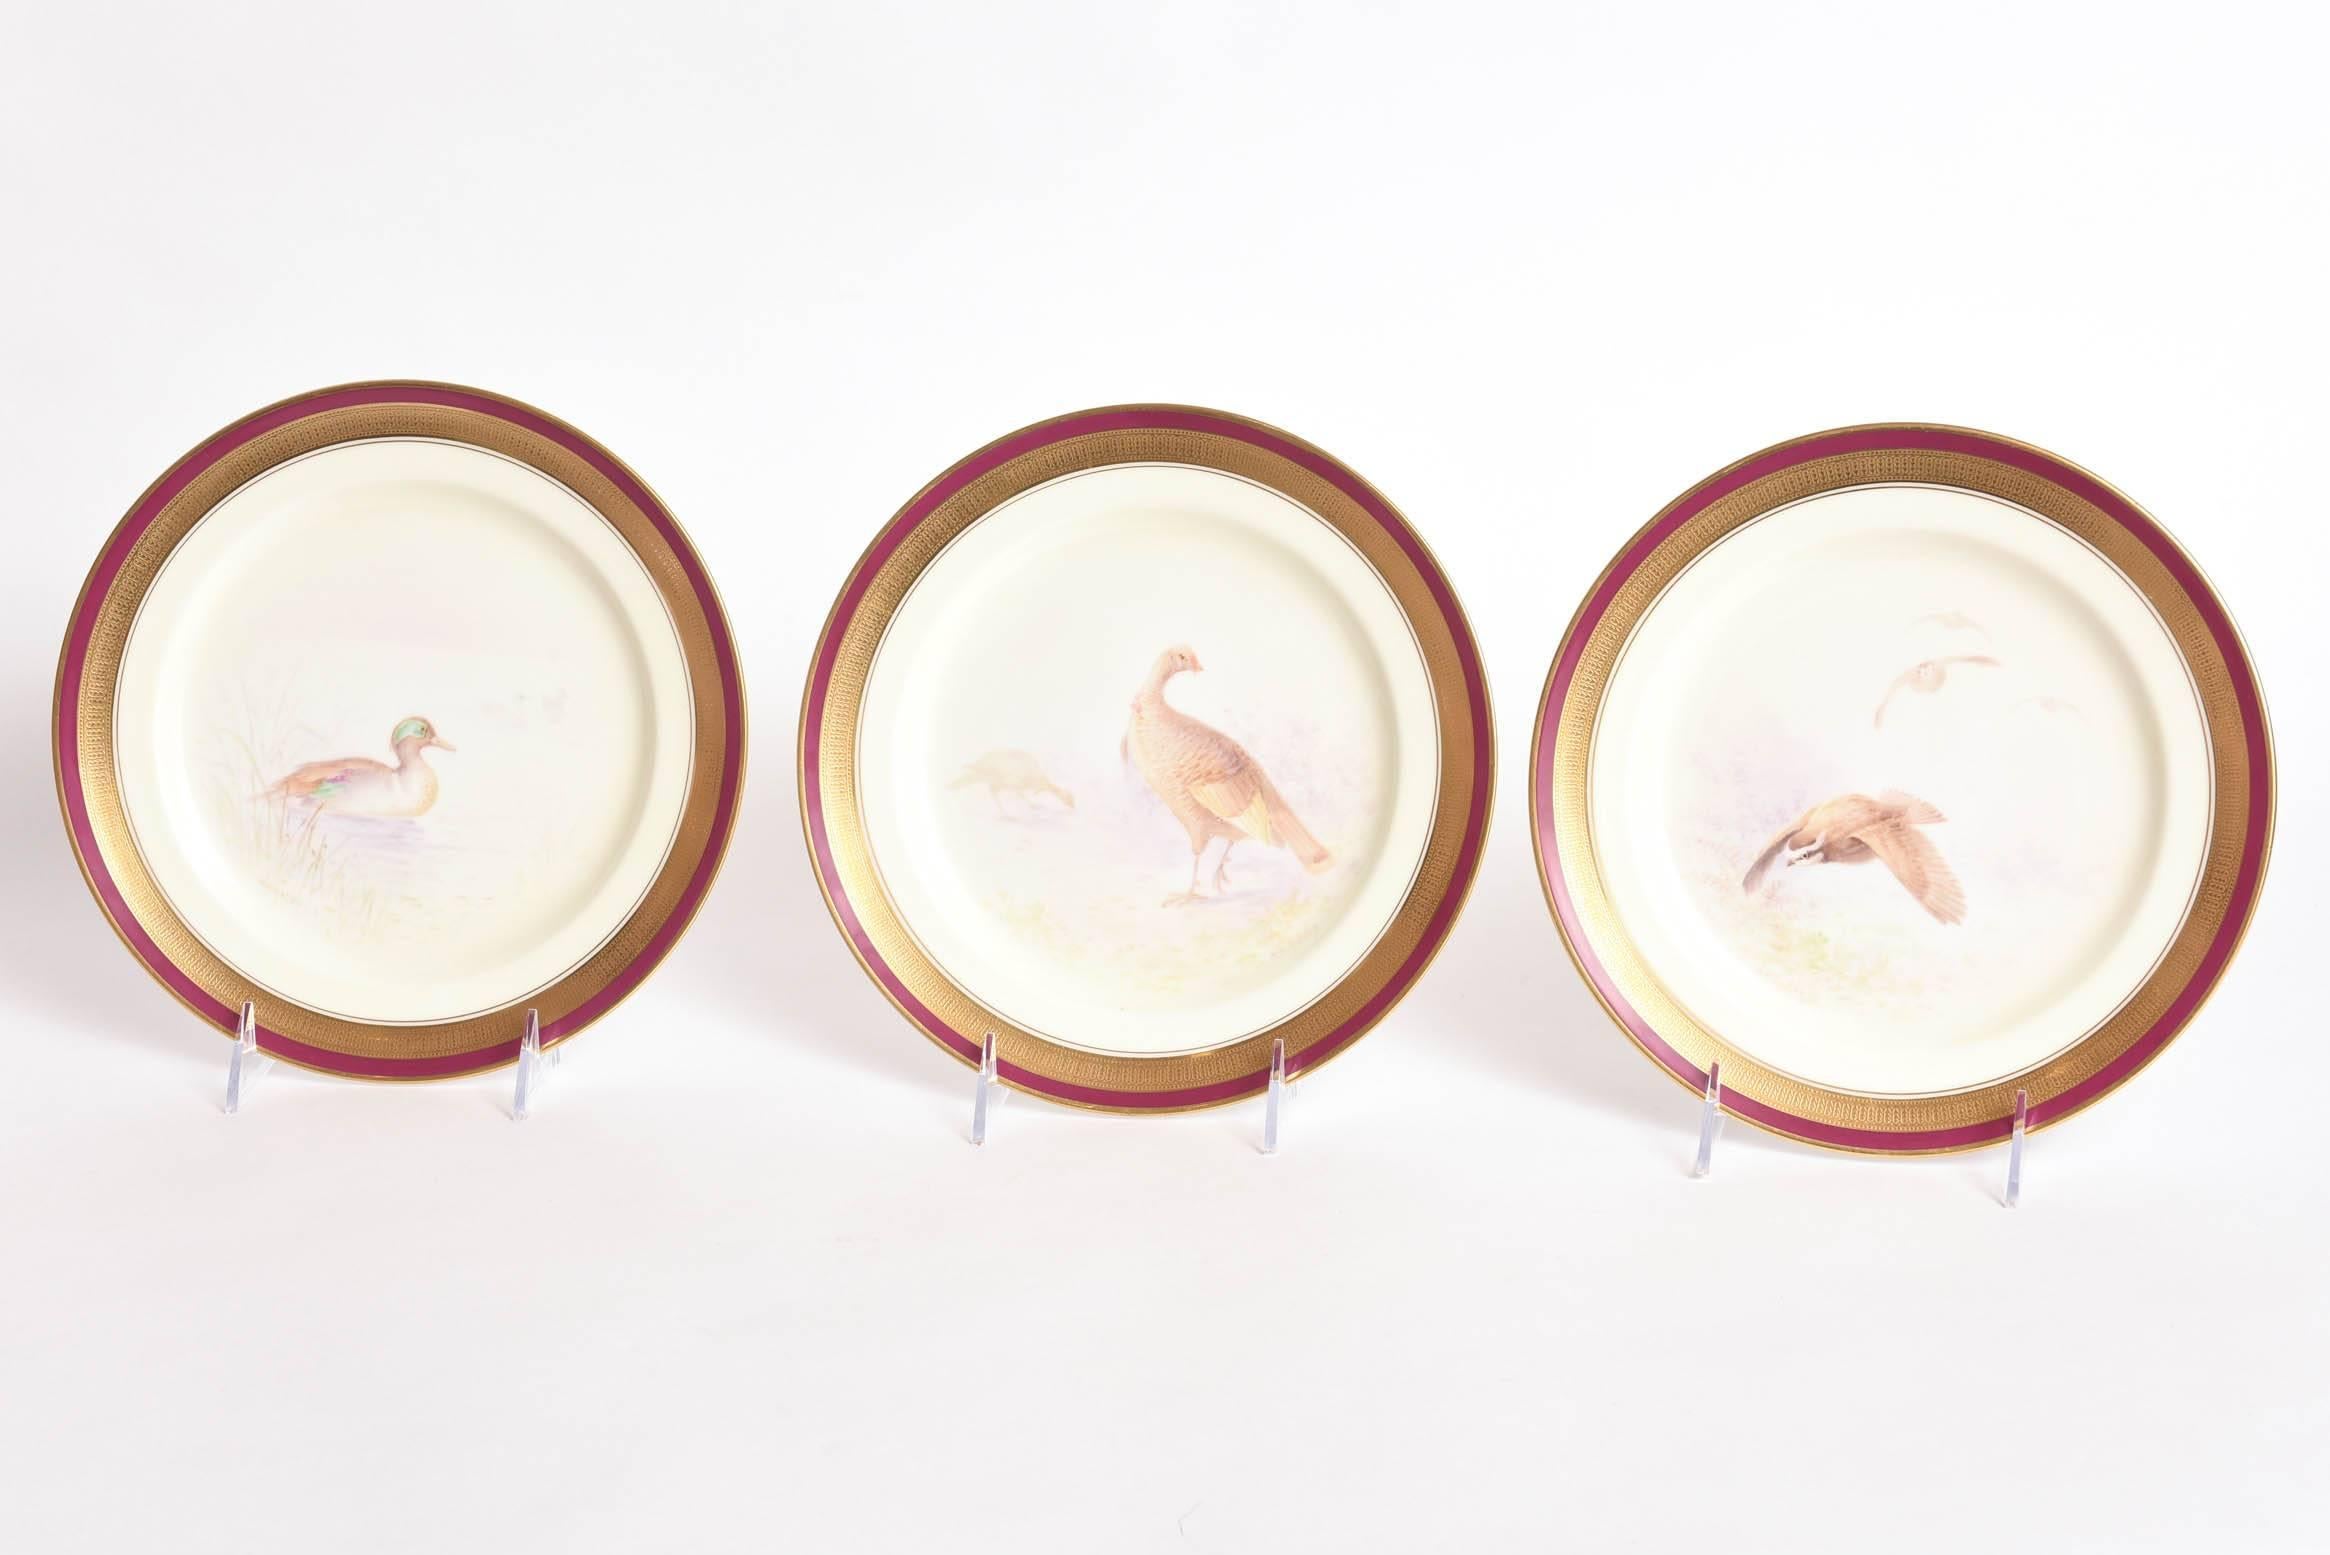 12 Game Bird Plates, Hand-Painted & Artist Signed. Rare Ruby Red Border, Antique 1